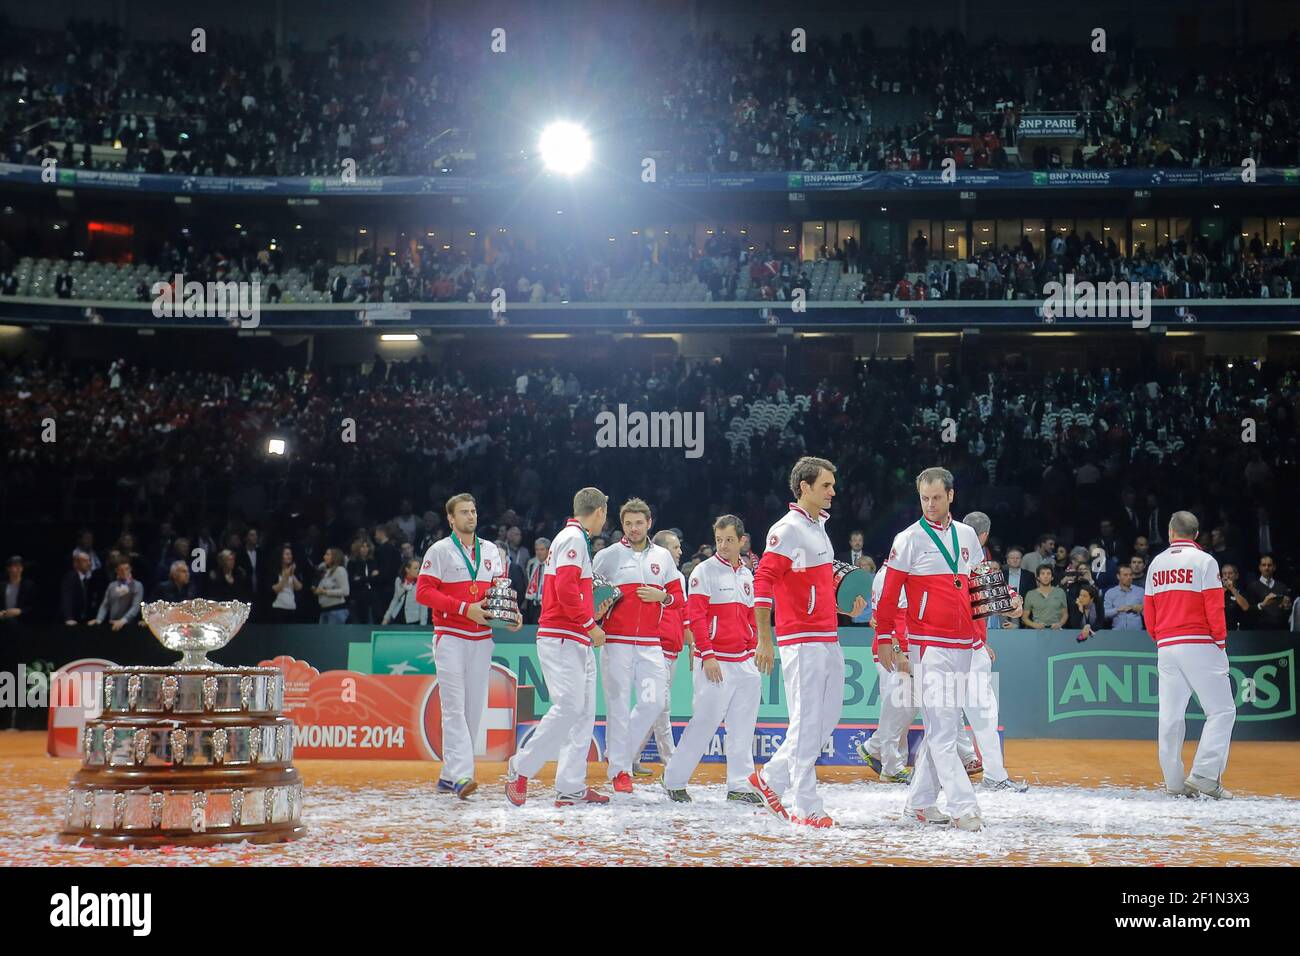 Page 2 - Switzerland Team Group Photo High Resolution Stock Photography and  Images - Alamy